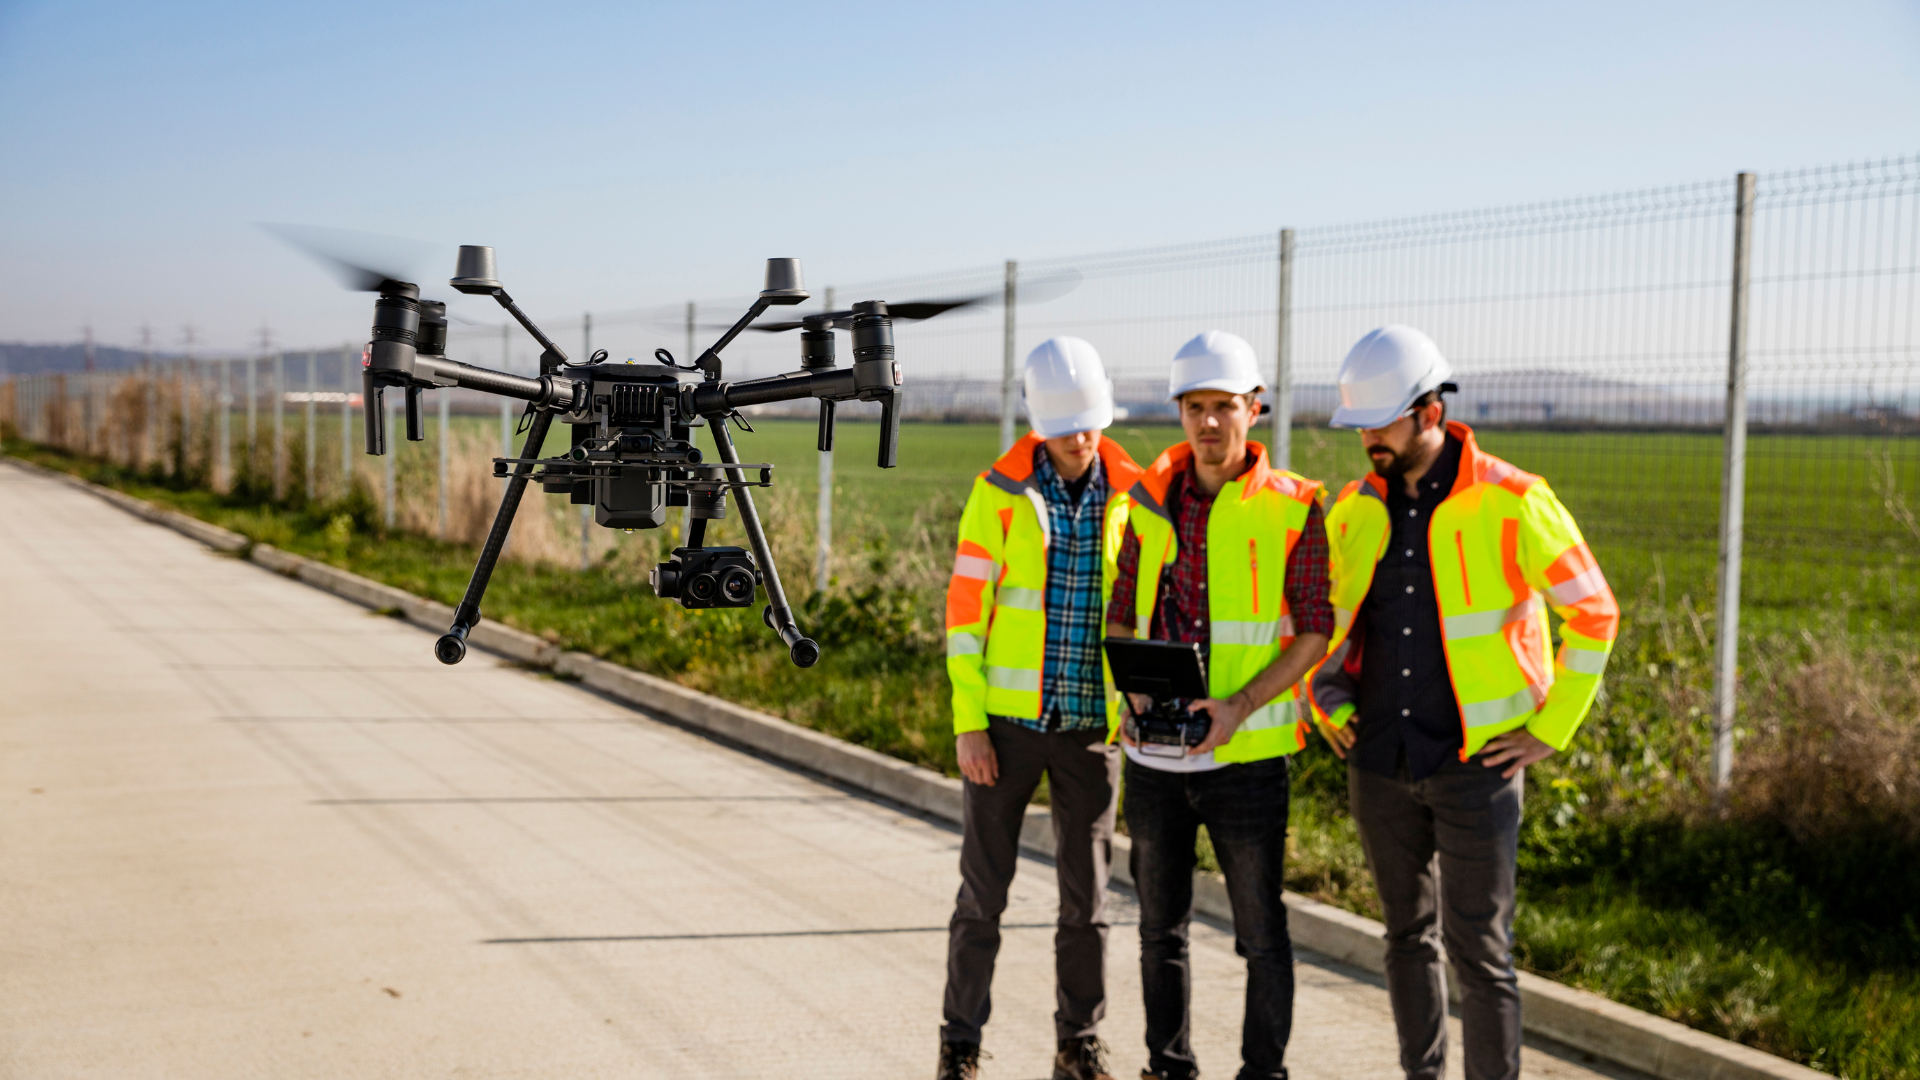 3 Construction Workers Piloting a Drone